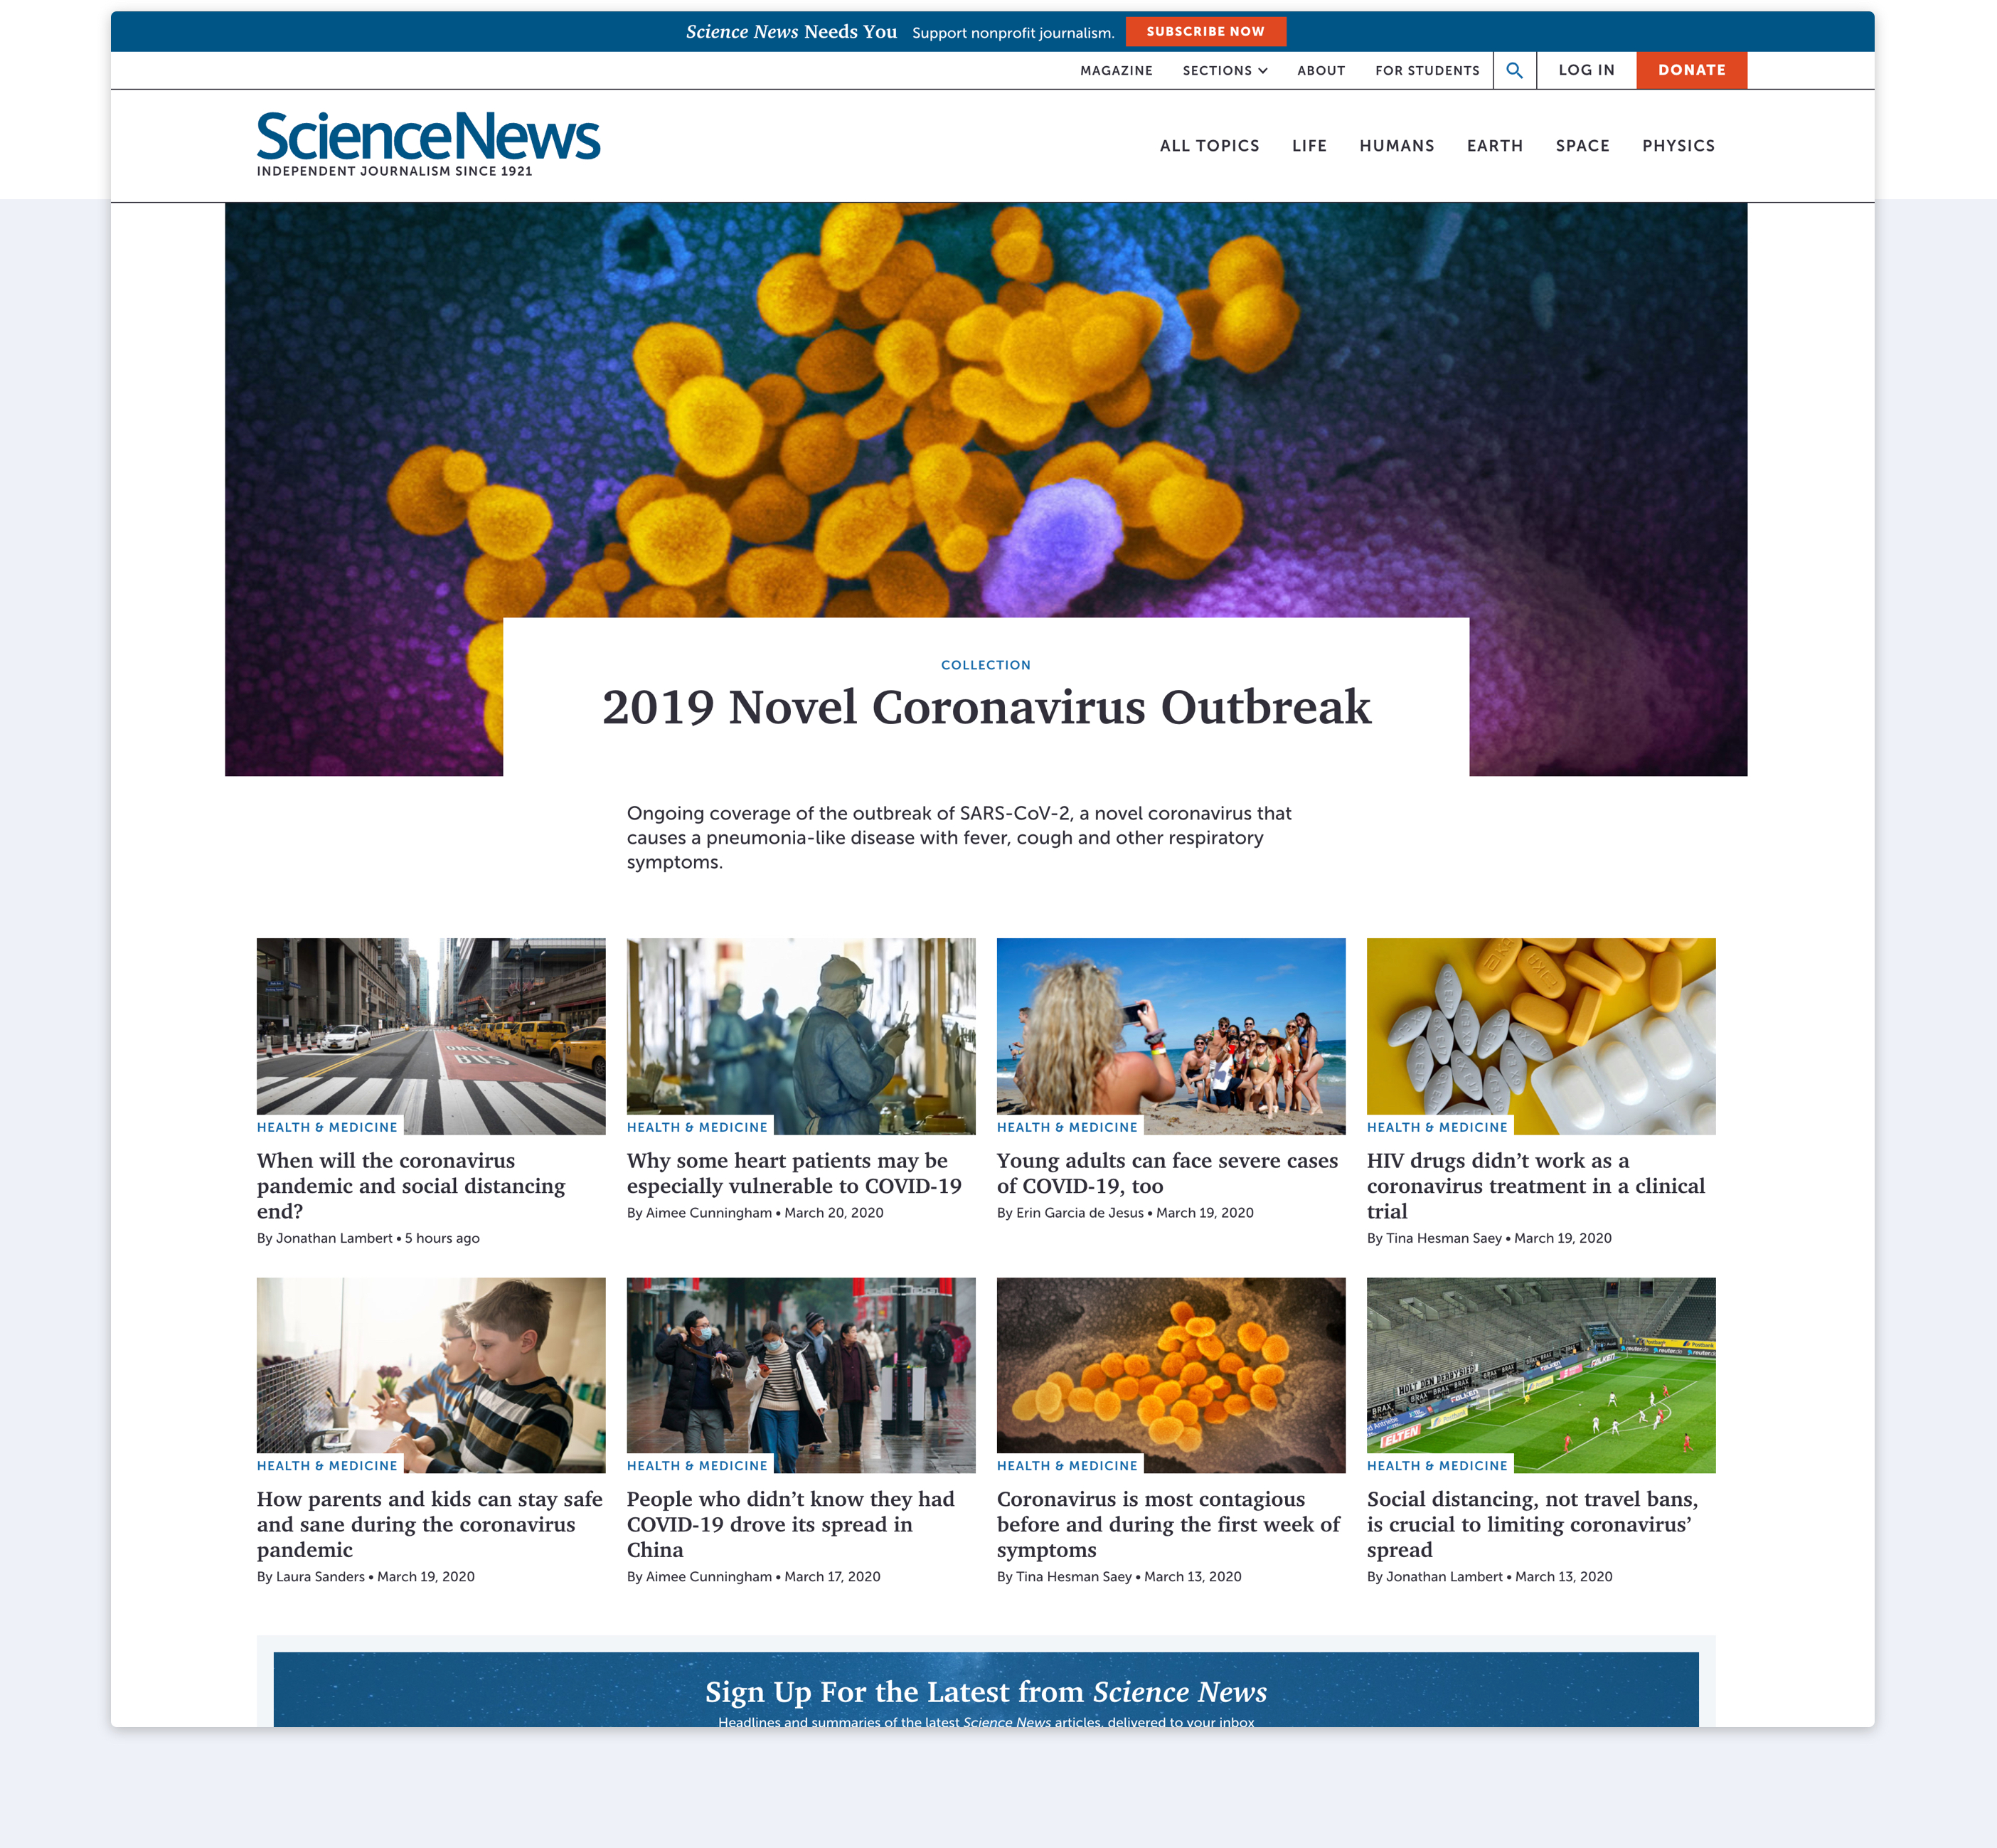 The main page of Science News with navigation, featured article, and additional content